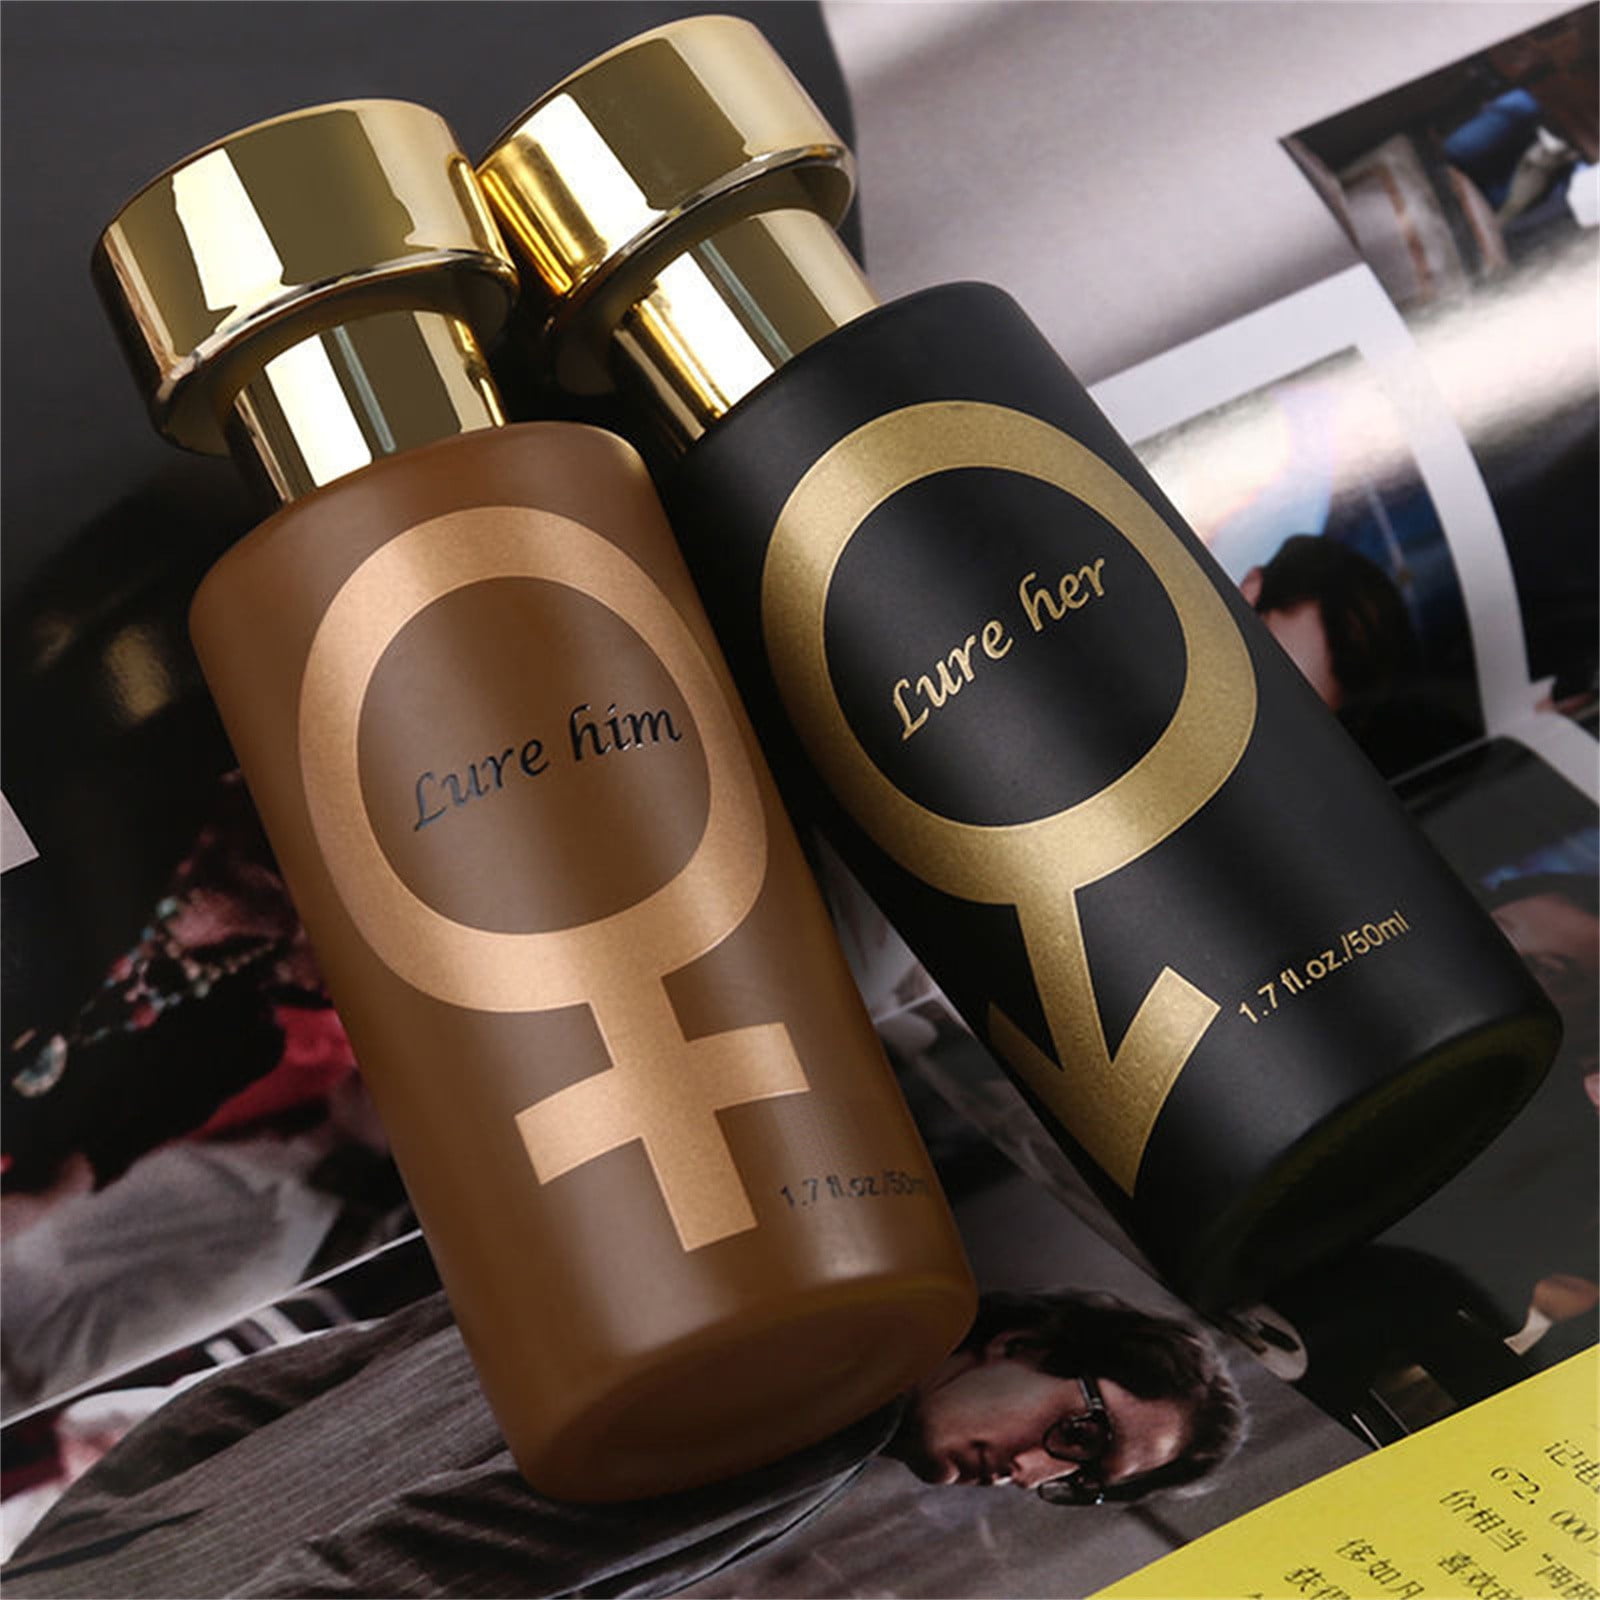 Golden Lure Perfume, 50ml Golden Lure Perfume to Attract Men and